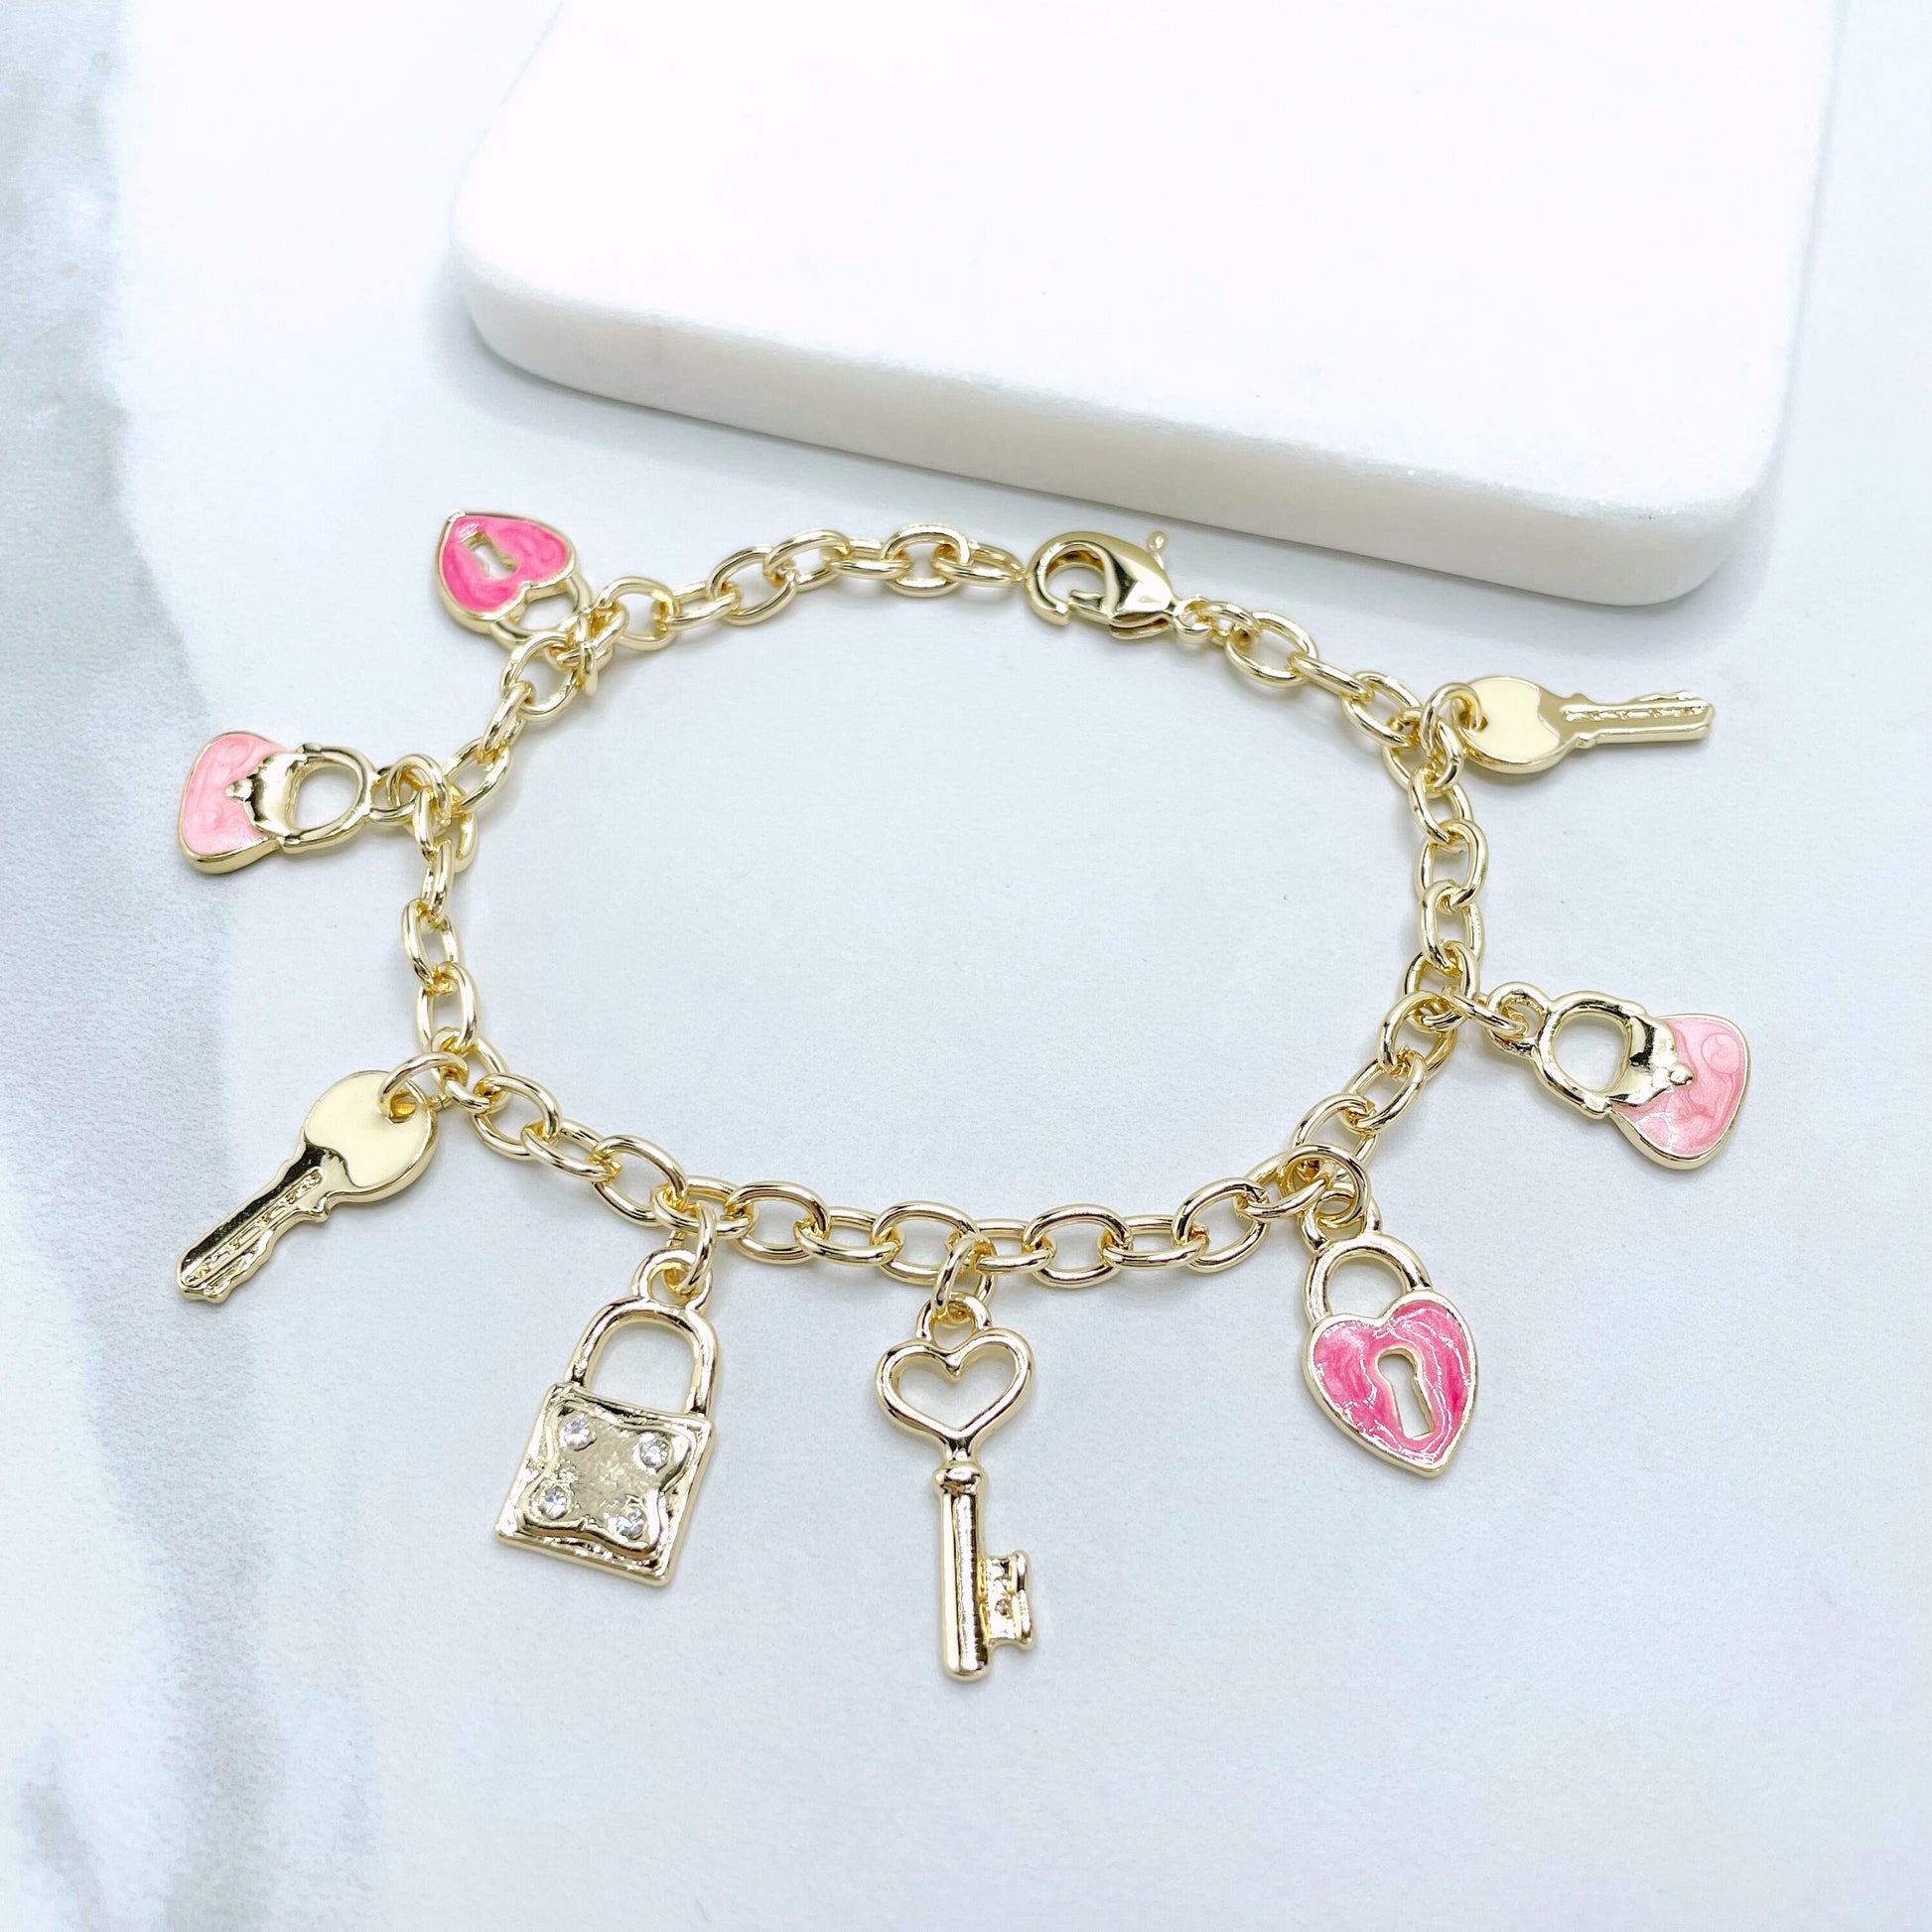 18k Gold Filled Pink Enamel with CZ details, Locks, Keys and Bags Charms in 5mm Oval Link Bracelet, Wholesale Jewelry Making Supplies